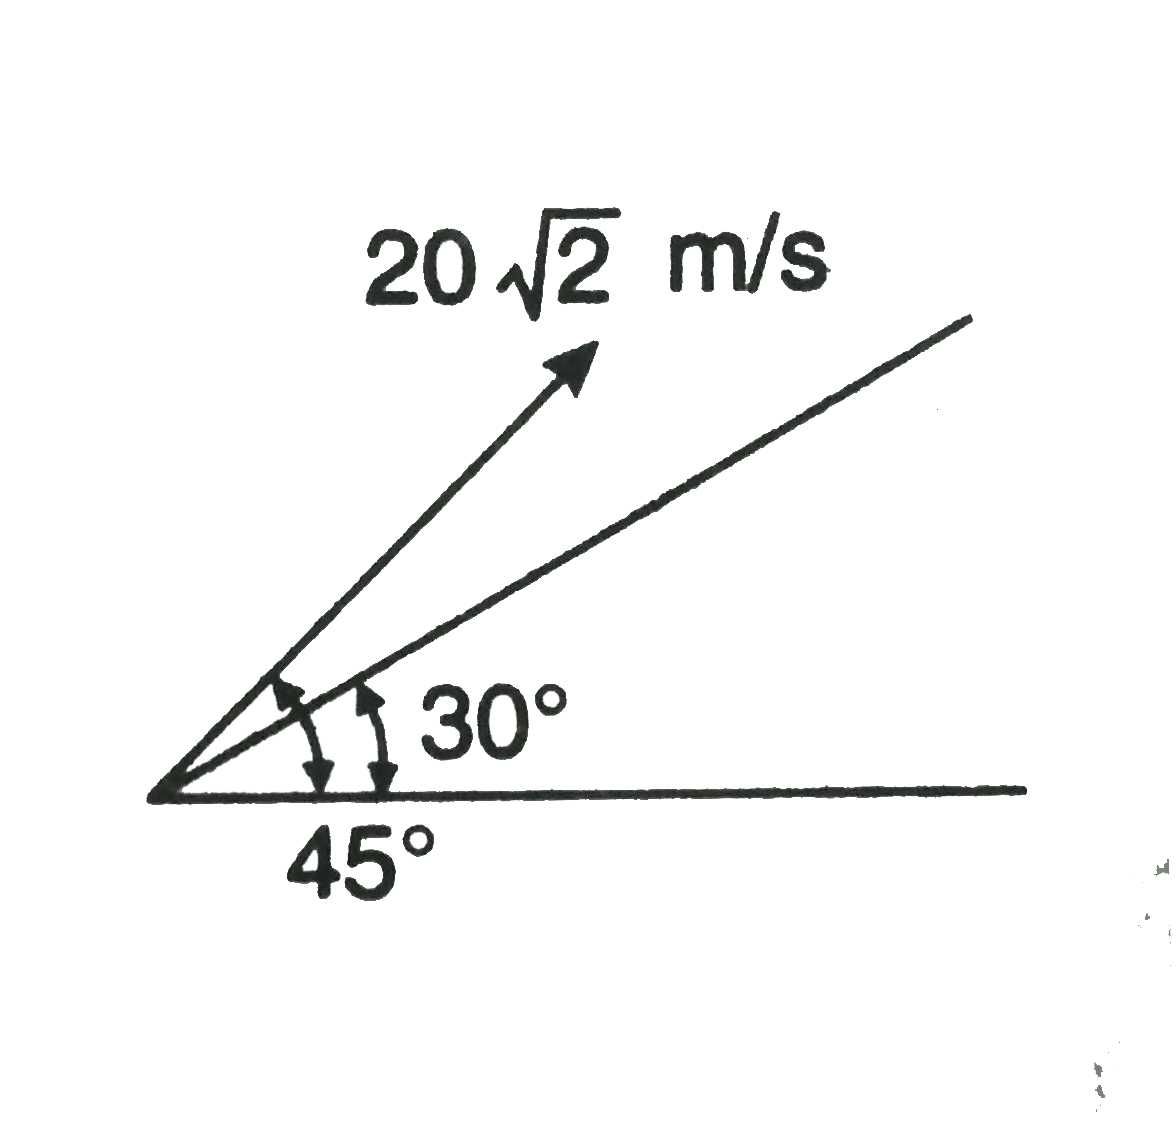 Find time of flight and range of the projectile along the inclined plane as shown in figure. (g = 10 m//s^2)